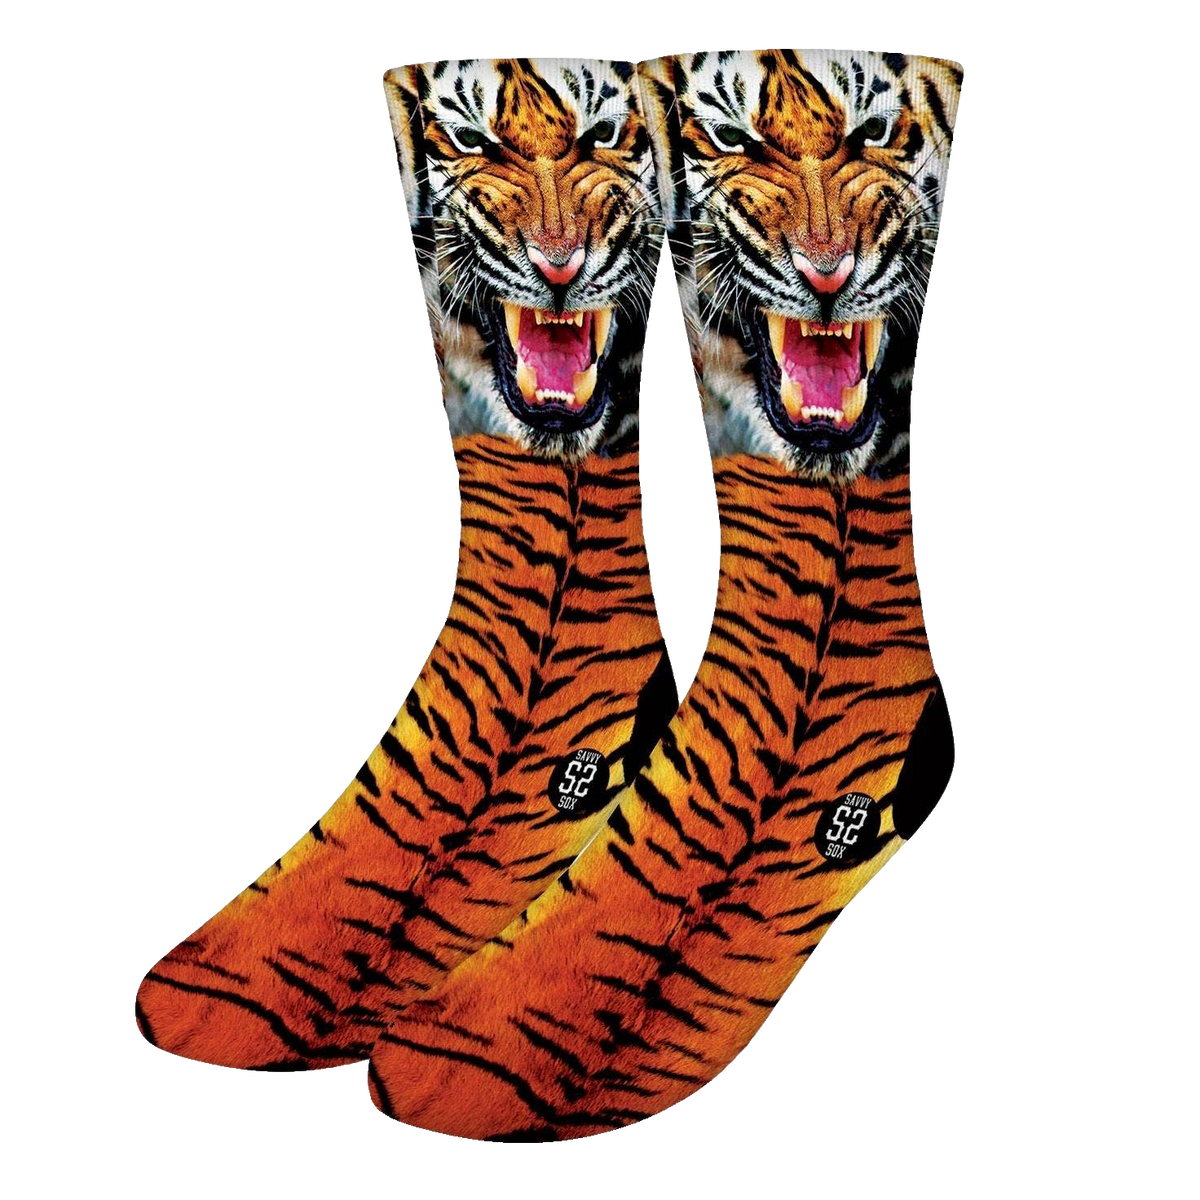 Scowling Tiger Face Socks